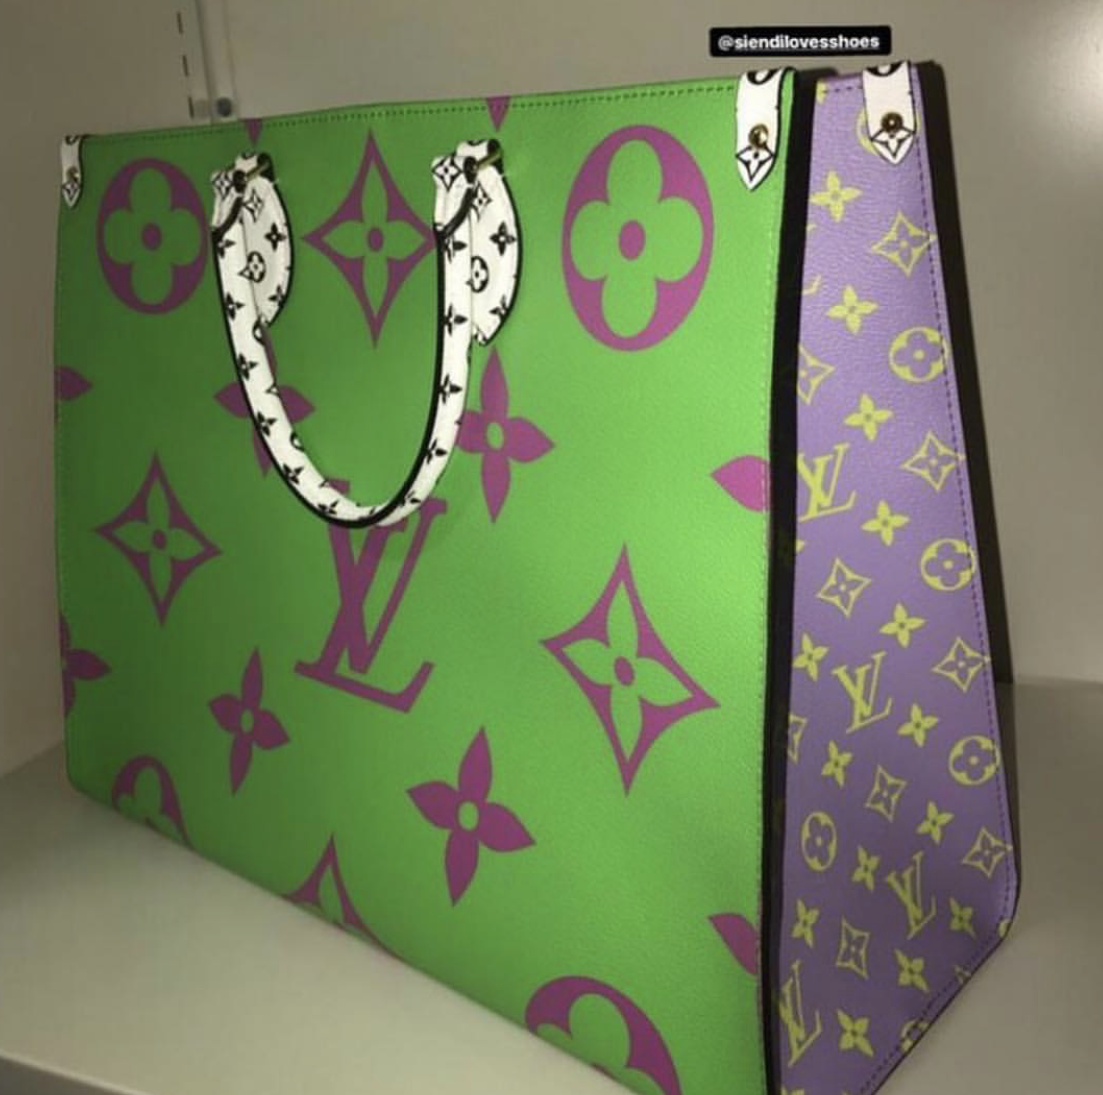 Bomb Product of the Day: Spring/Summer 2019 Louis Vuitton Accessories – Fashion Bomb Daily Style ...